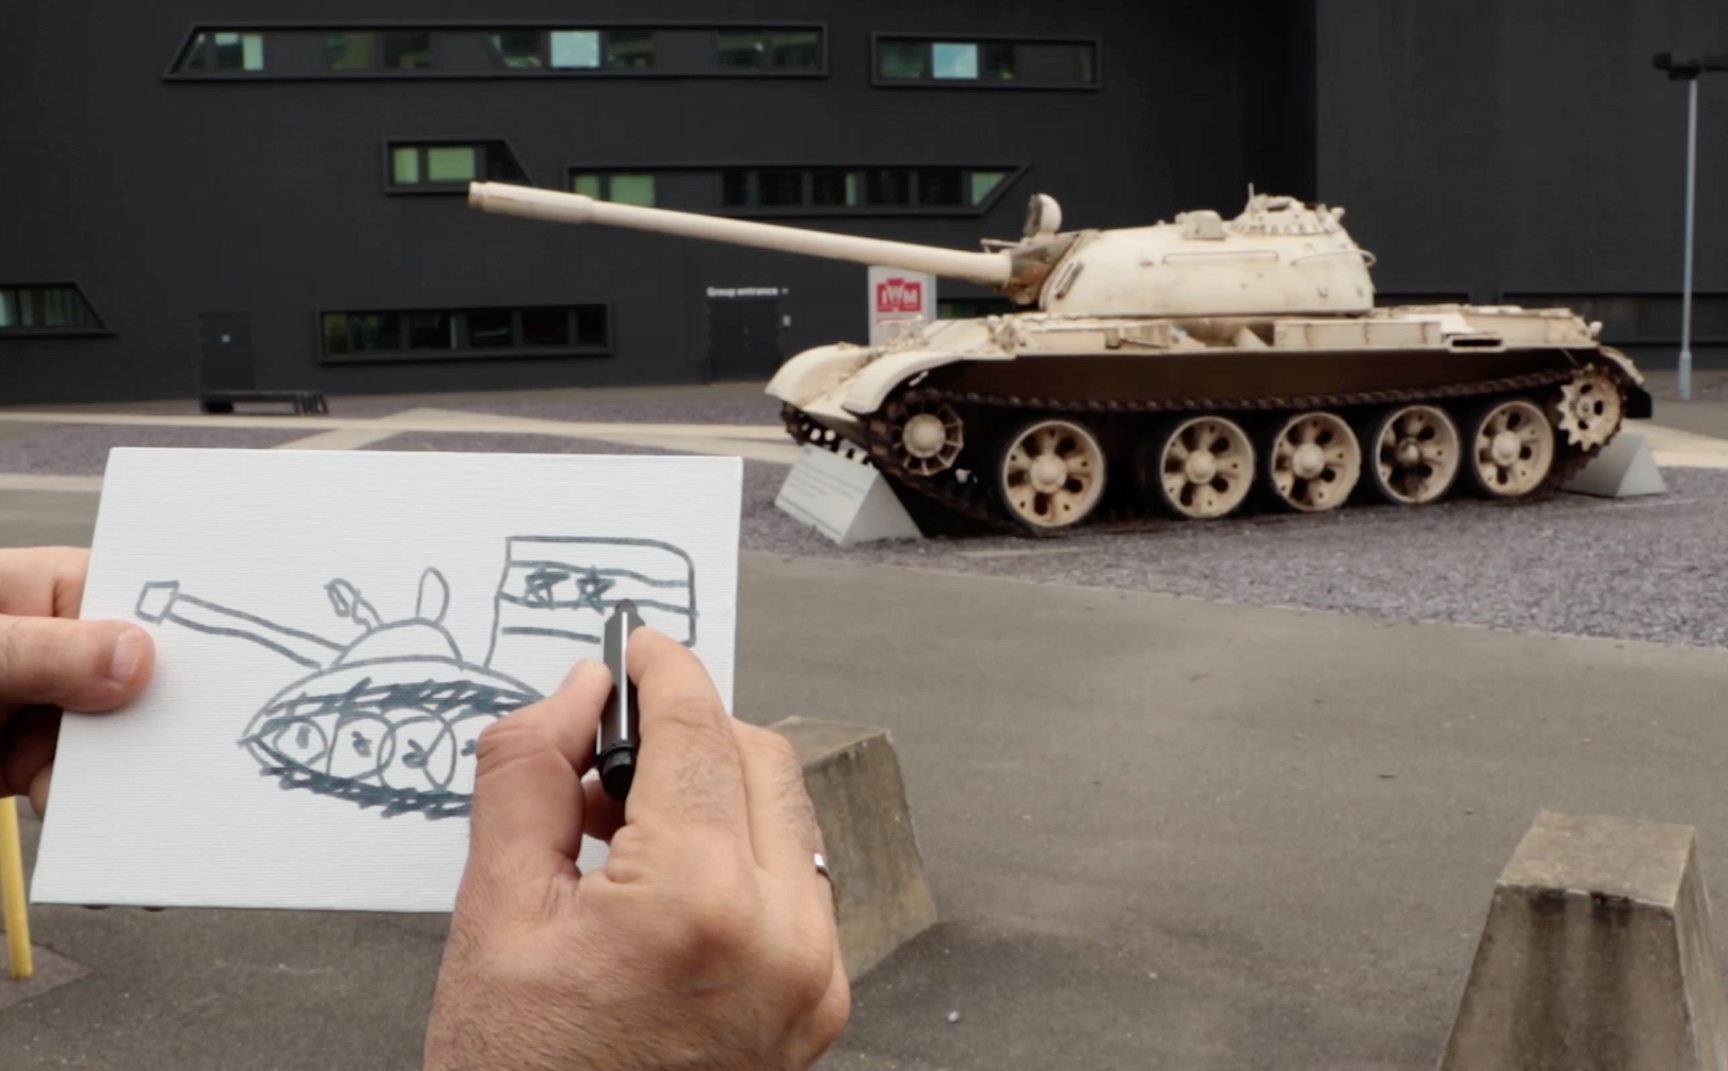 The Tank of My Sketchbook (still), HD and Archival Color Single-Channel video, 25 minutes and 12 seconds